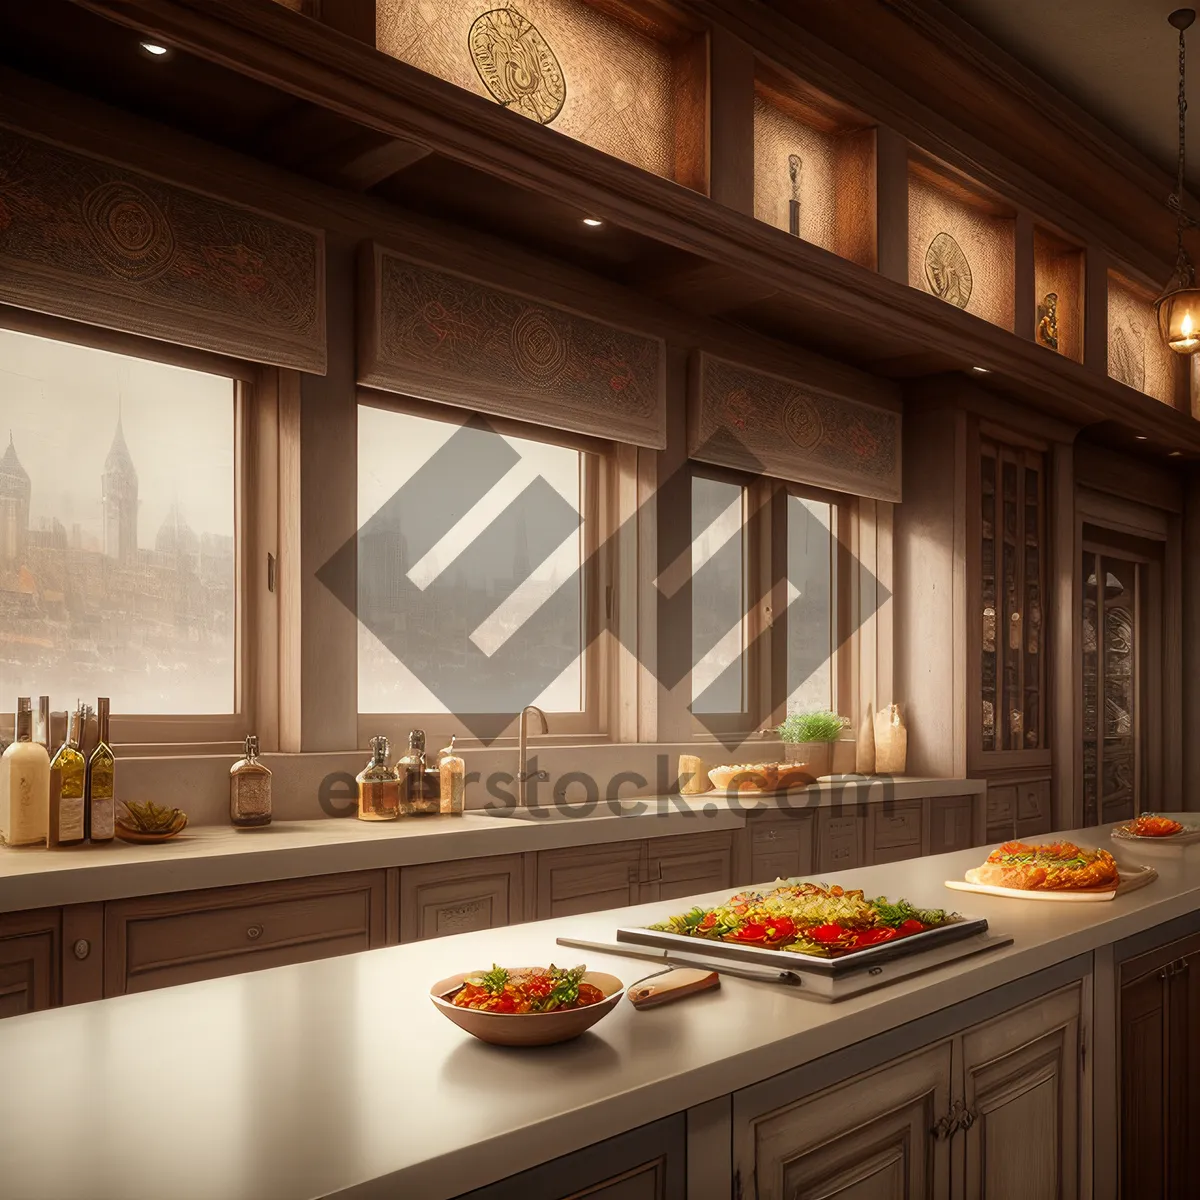 Picture of Modern Kitchen Interior with Luxury Furnishings